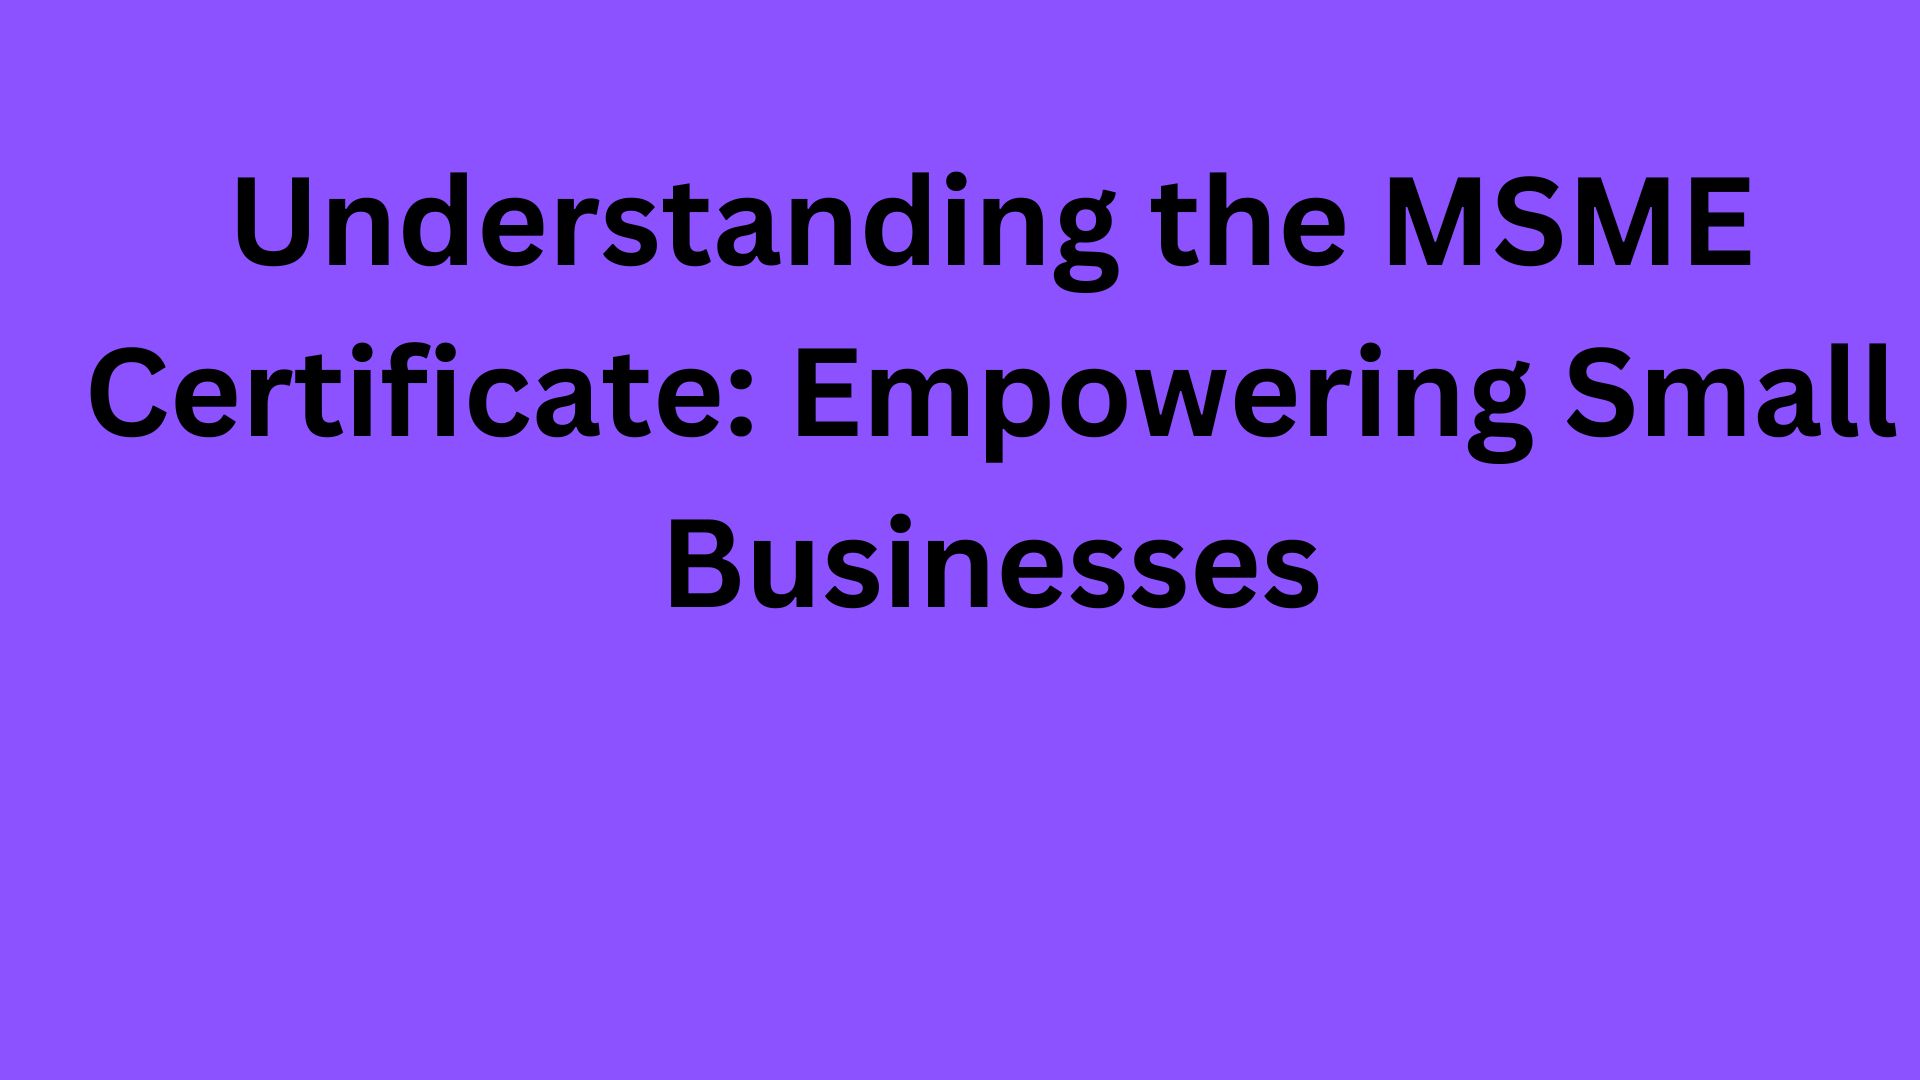 Understanding the MSME Certificate: Empowering Small Businesses